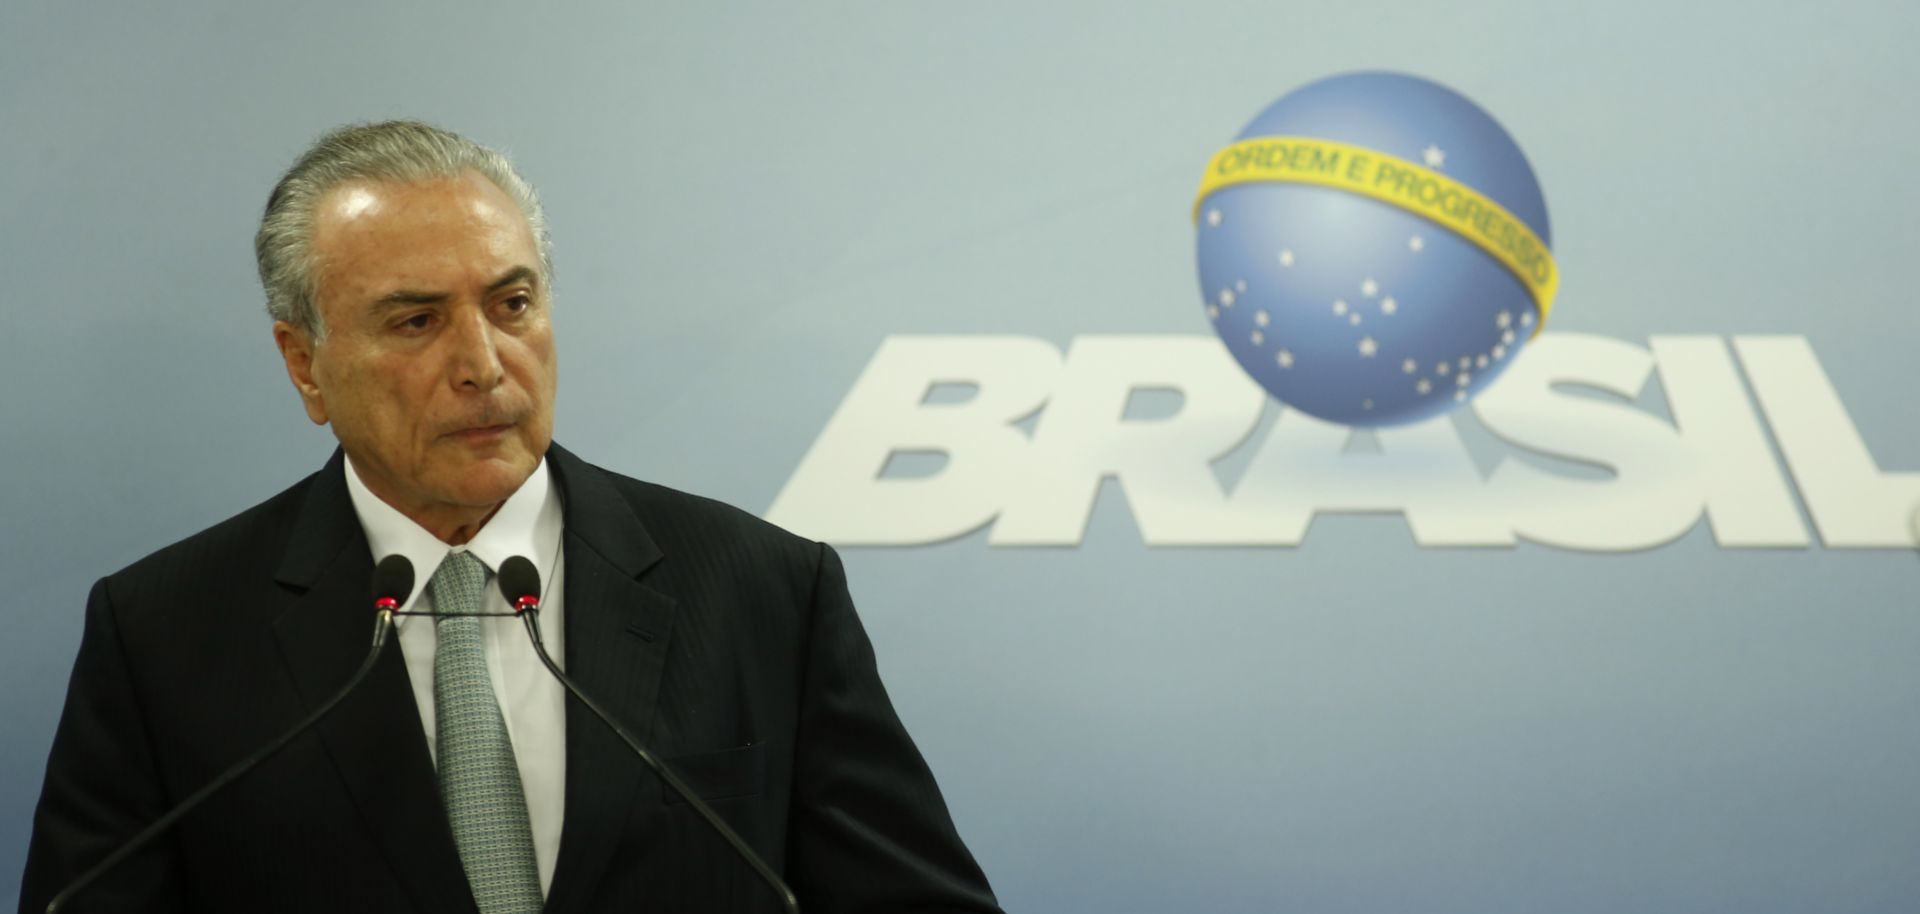 President Michel Temer delivers a statement in Brasilia, Brazil. A new round of corruption accusations against him comes at a crucial time for Mercosur in its talks with the European Union.